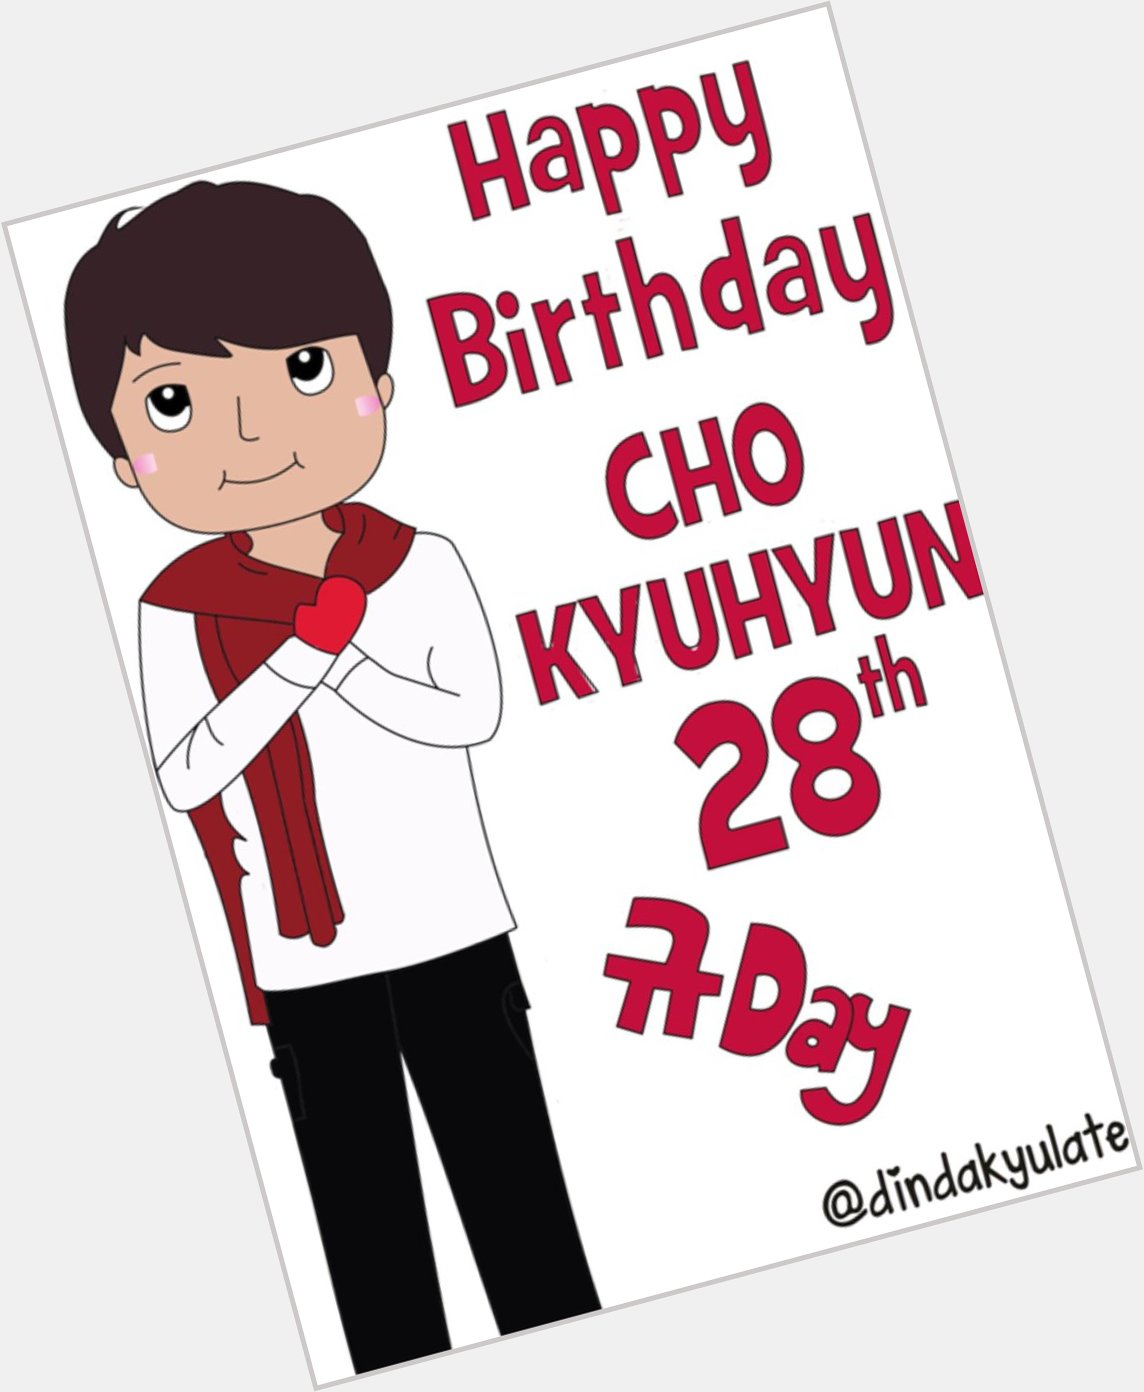 I made this for you. But it\s so absrd -_- :D 
Happy Birthday Cho Kyuhyun :*  